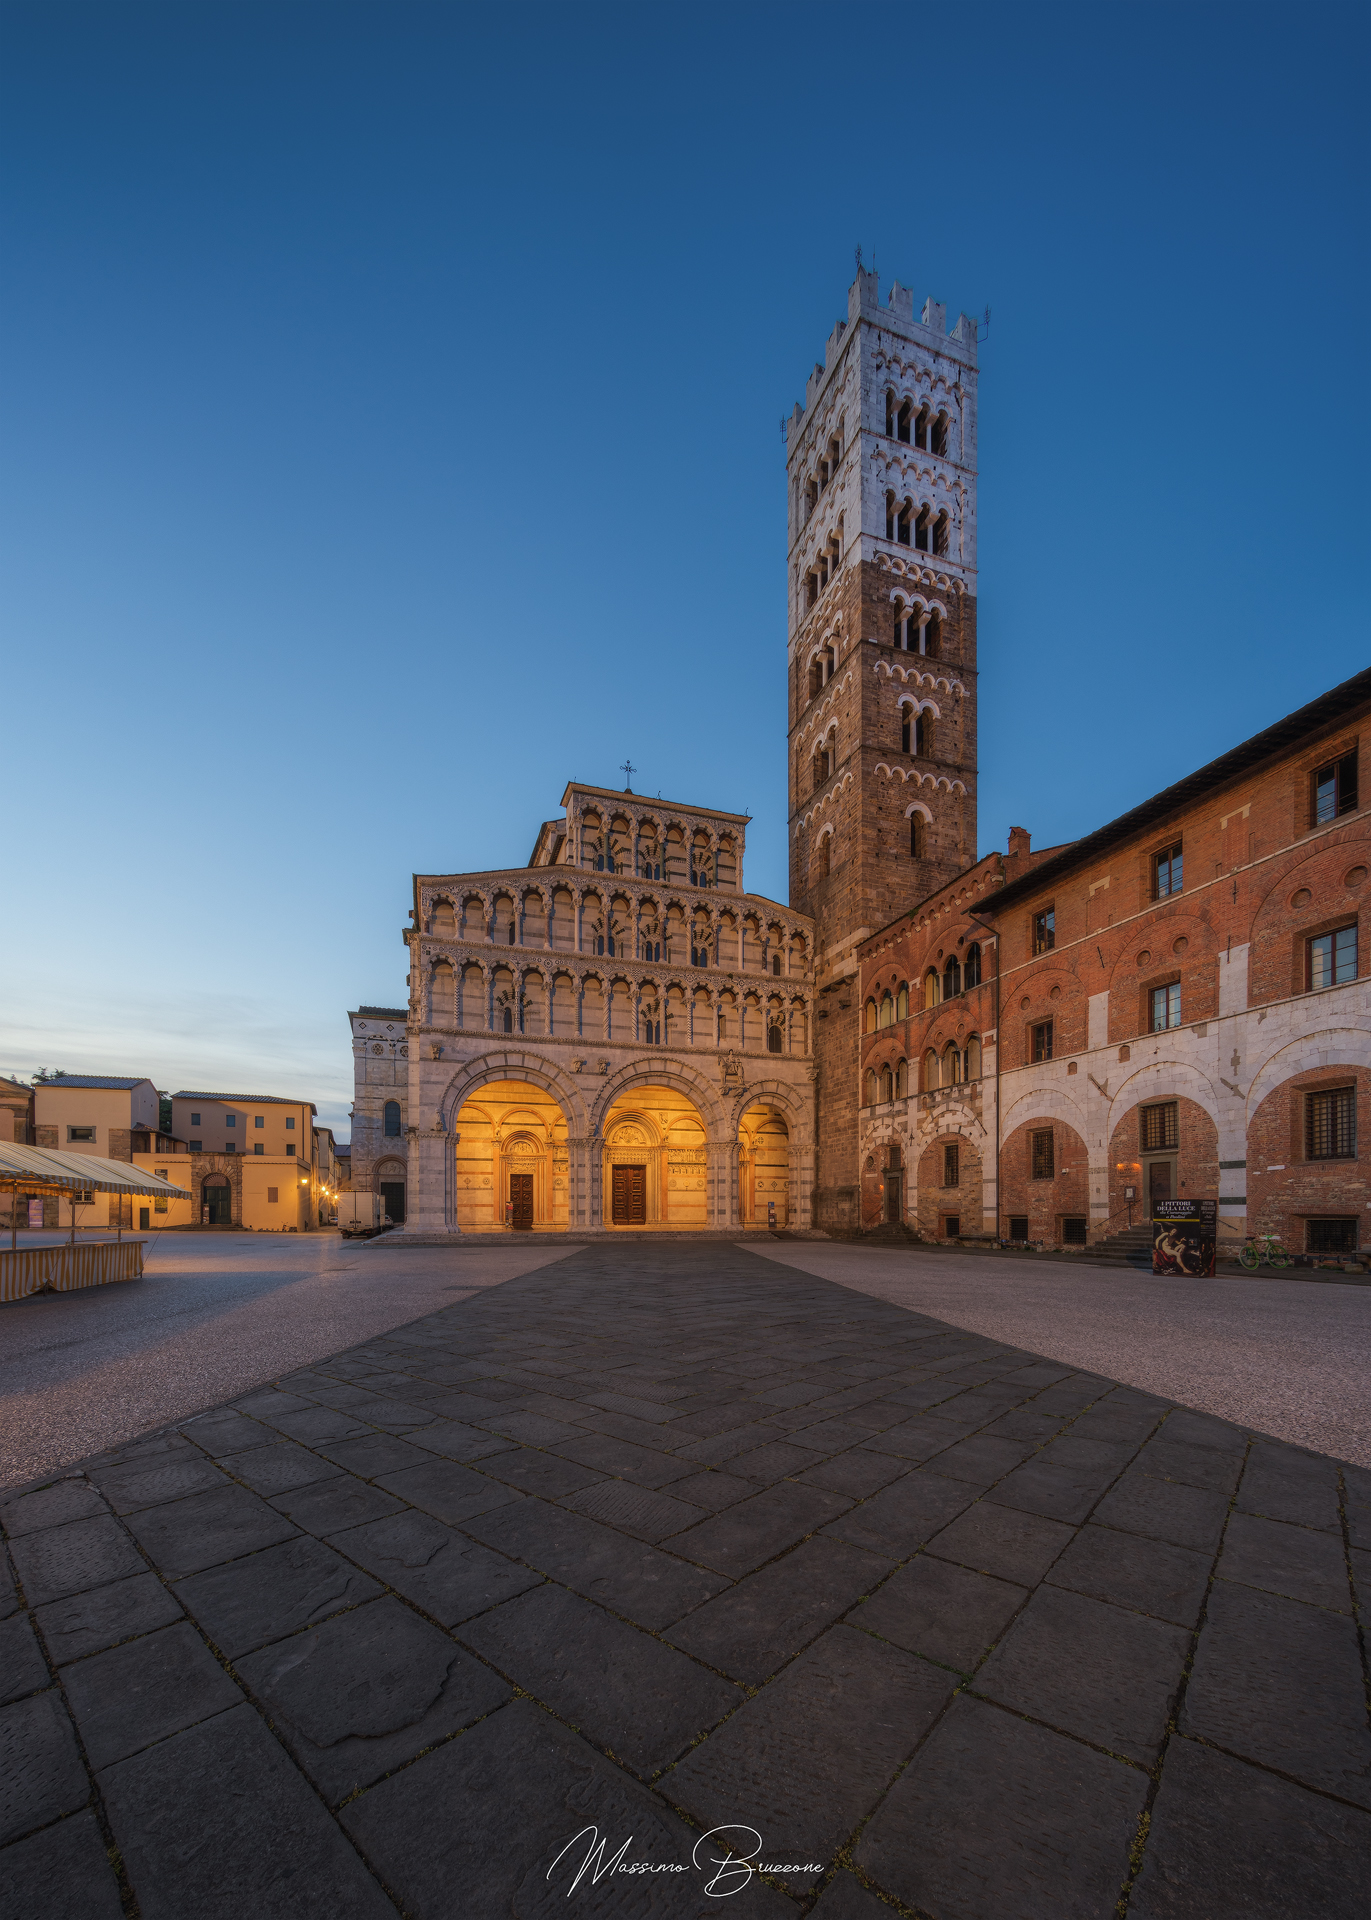 Cathedral of San Martino Lucca...